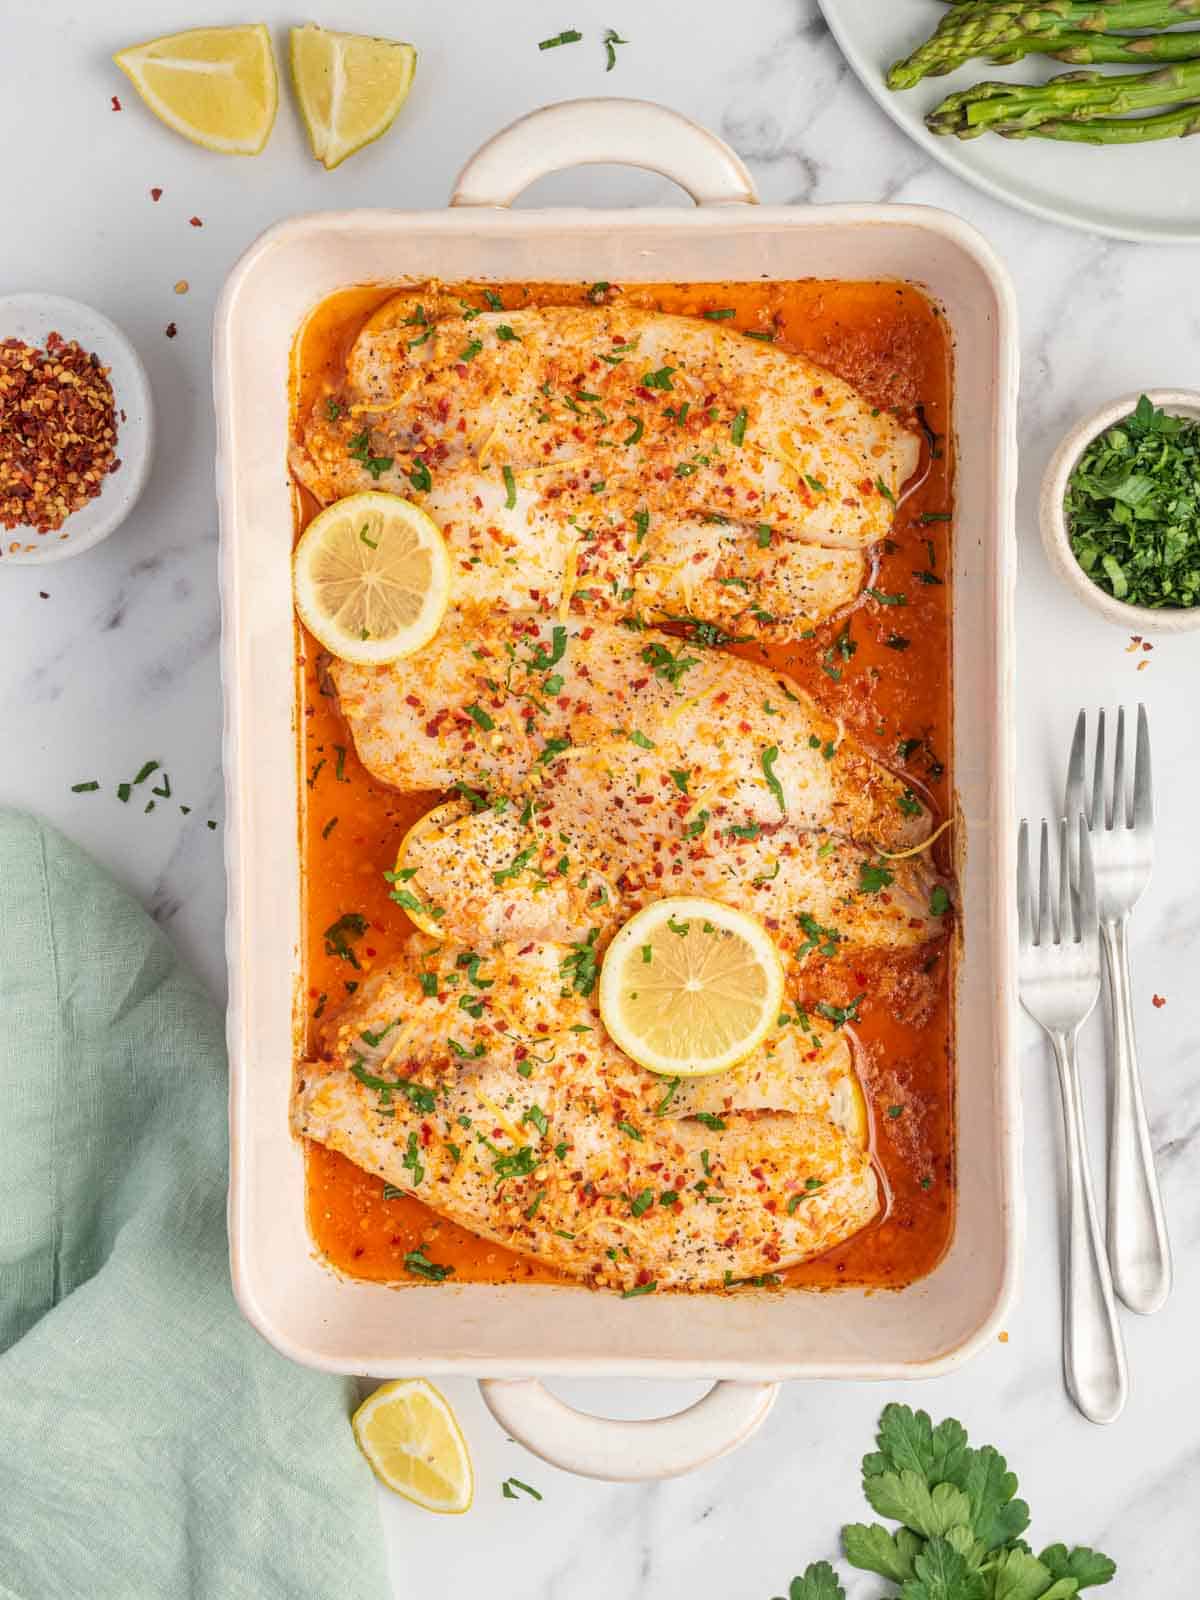 Finished easy oven baked tilapia recipe in a baking dish with forks.